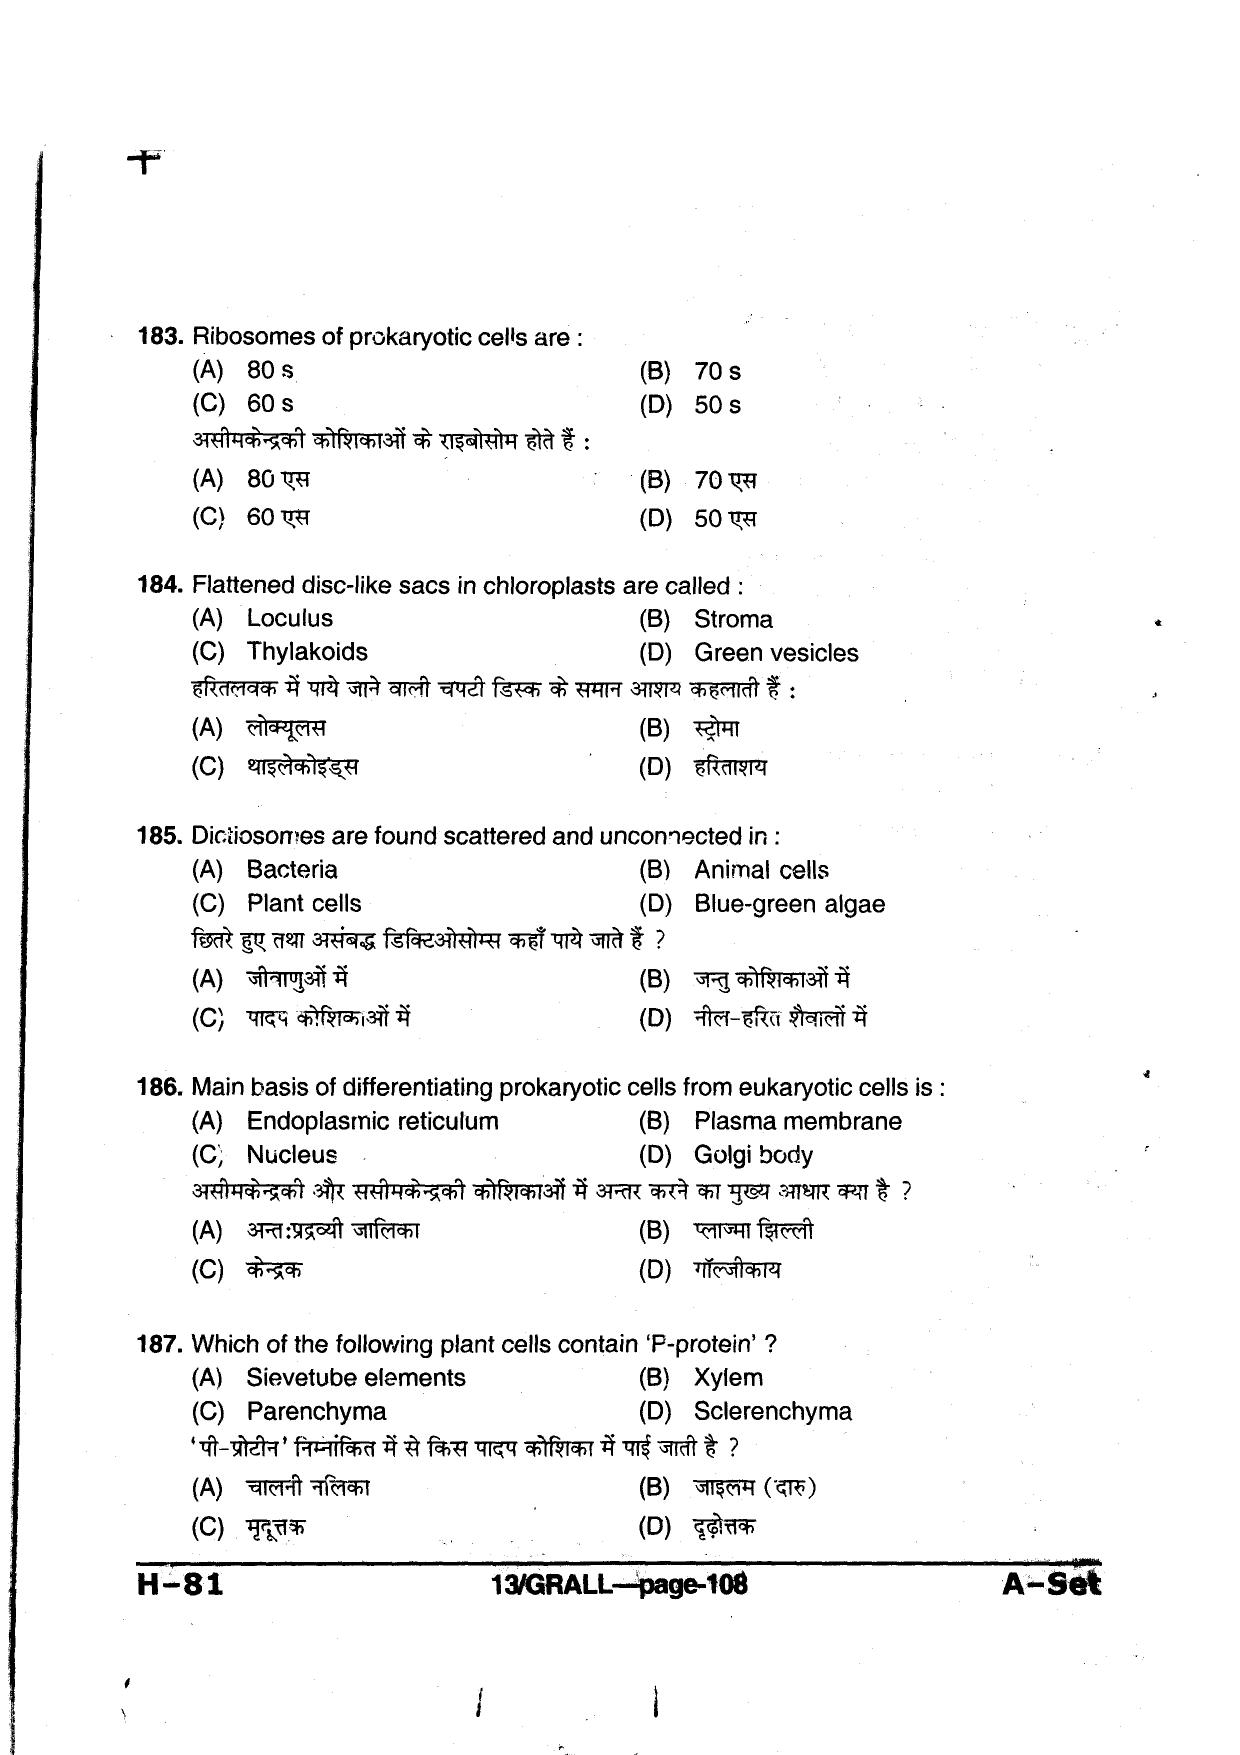 MP PAT 2013 Question Paper - Paper I - Page 108